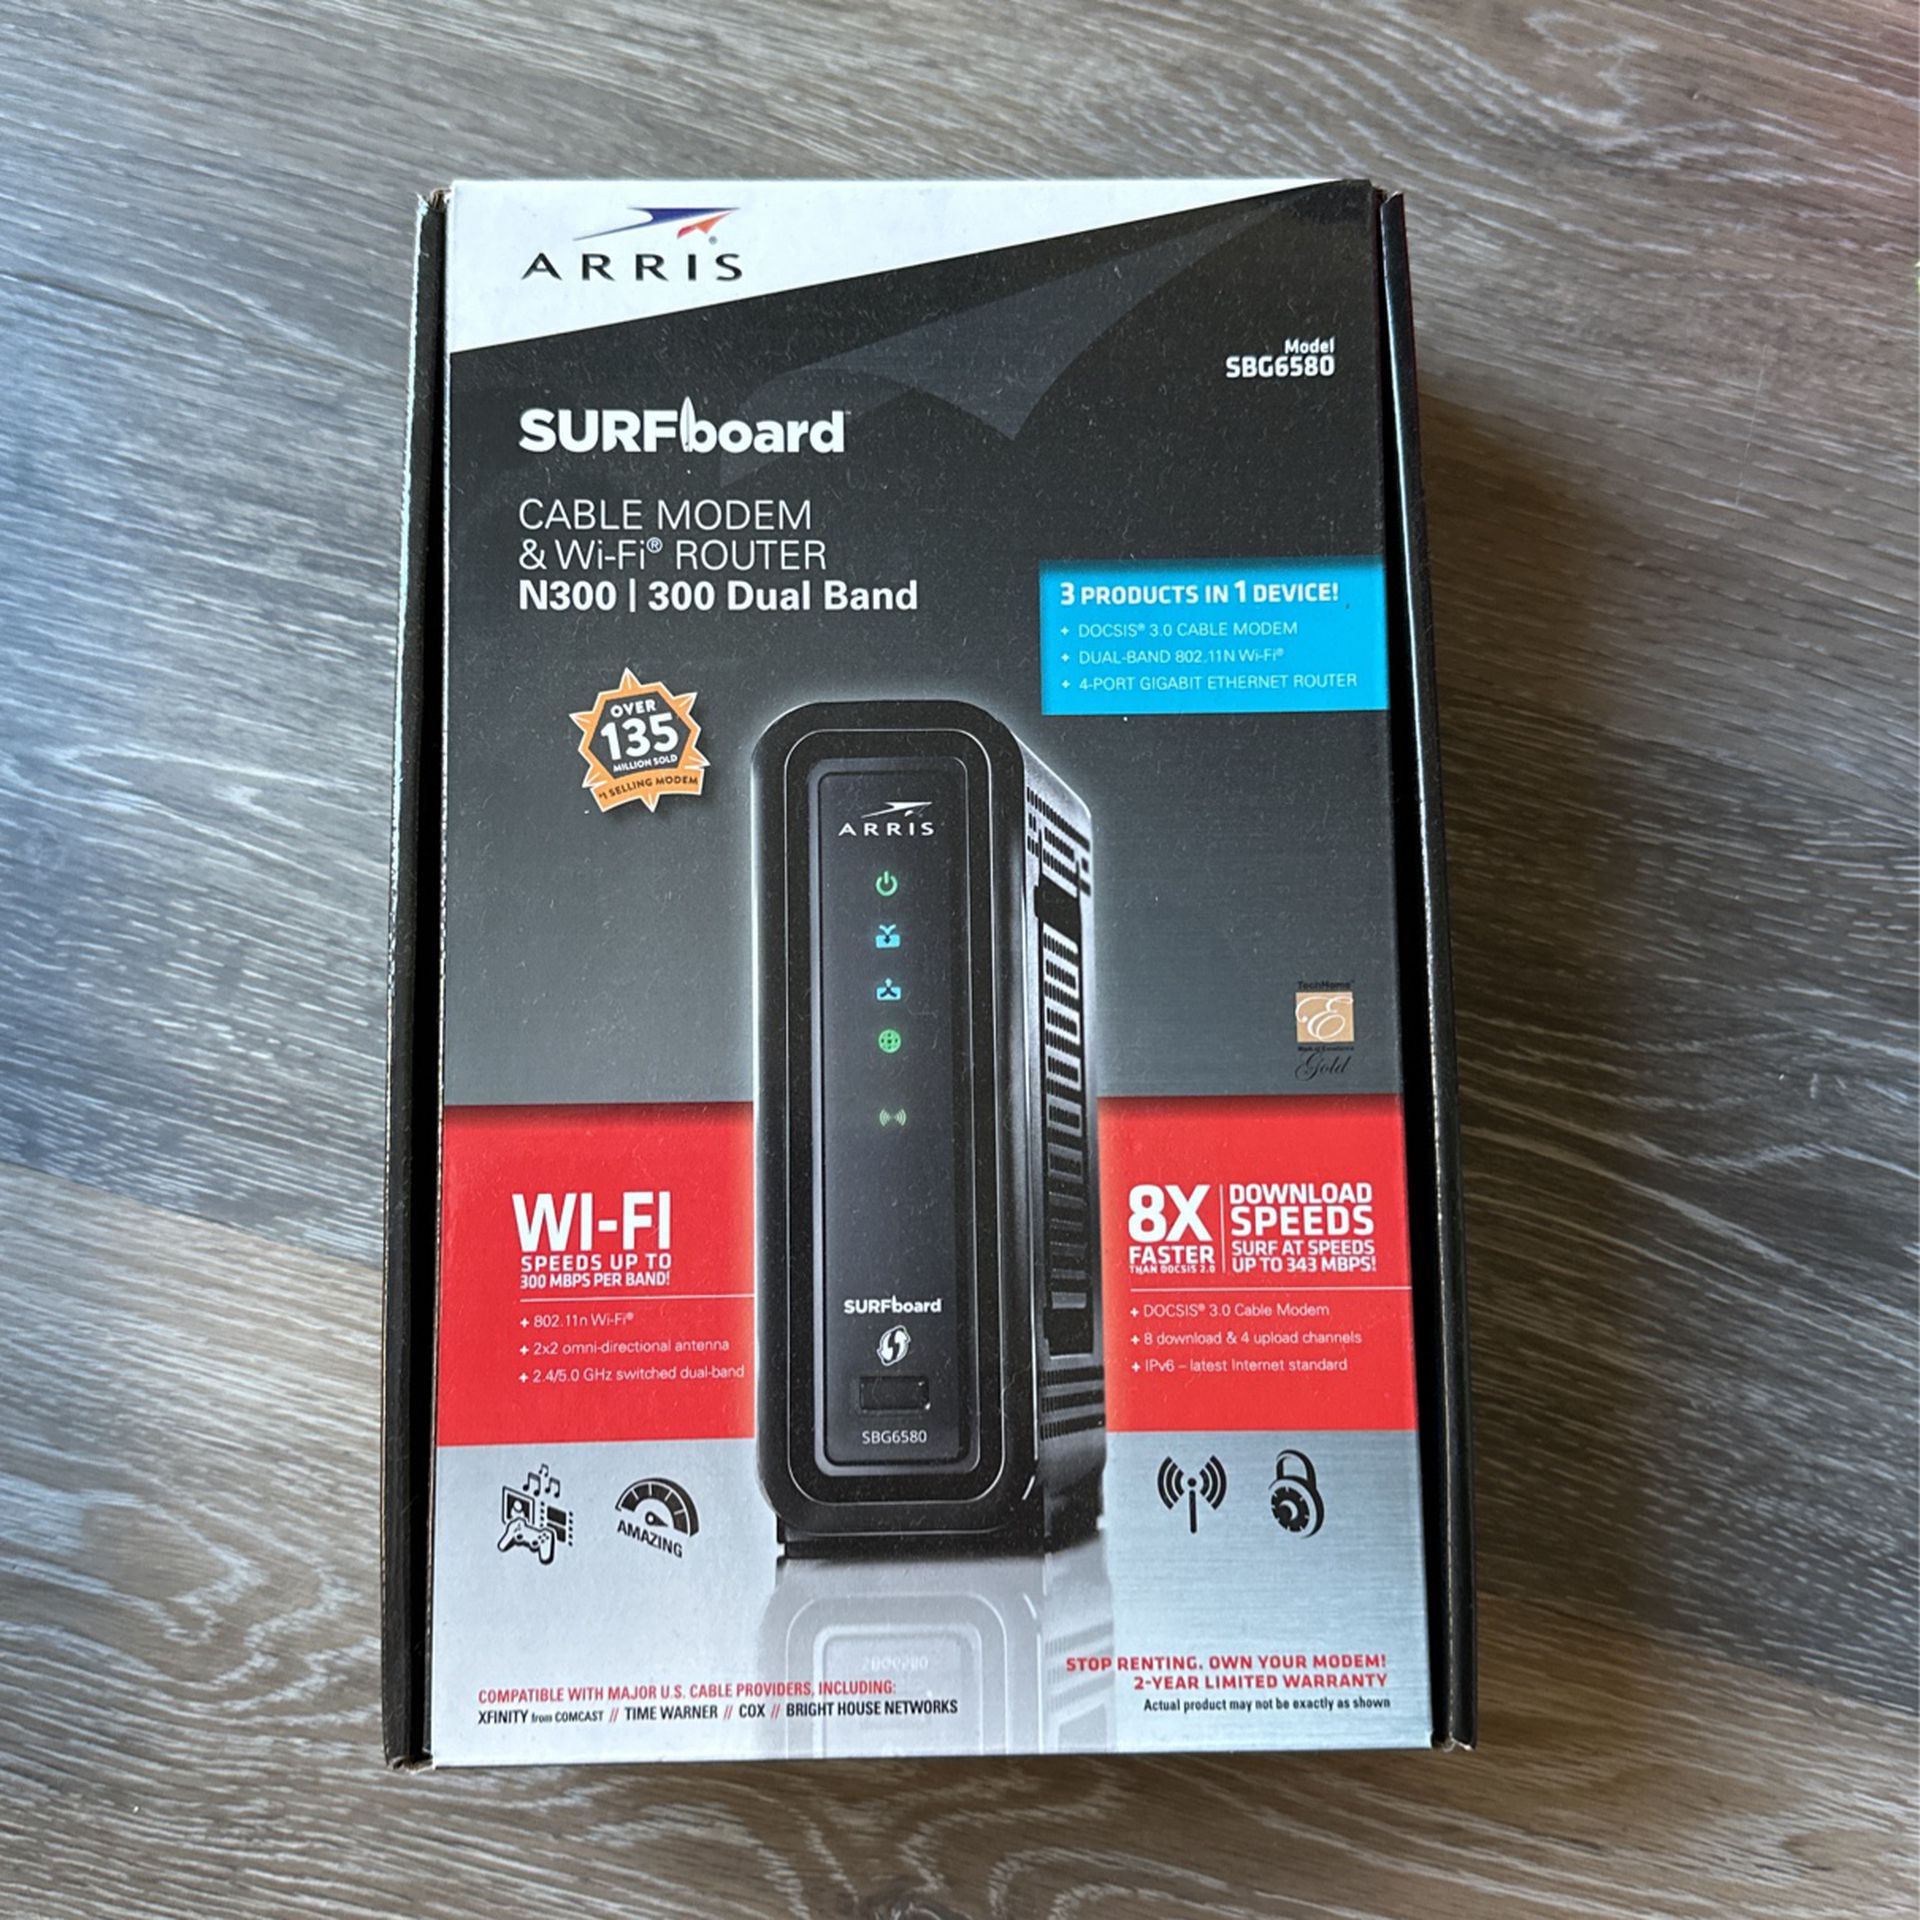 Arris Surfboard Cable Modem & WiFi Router